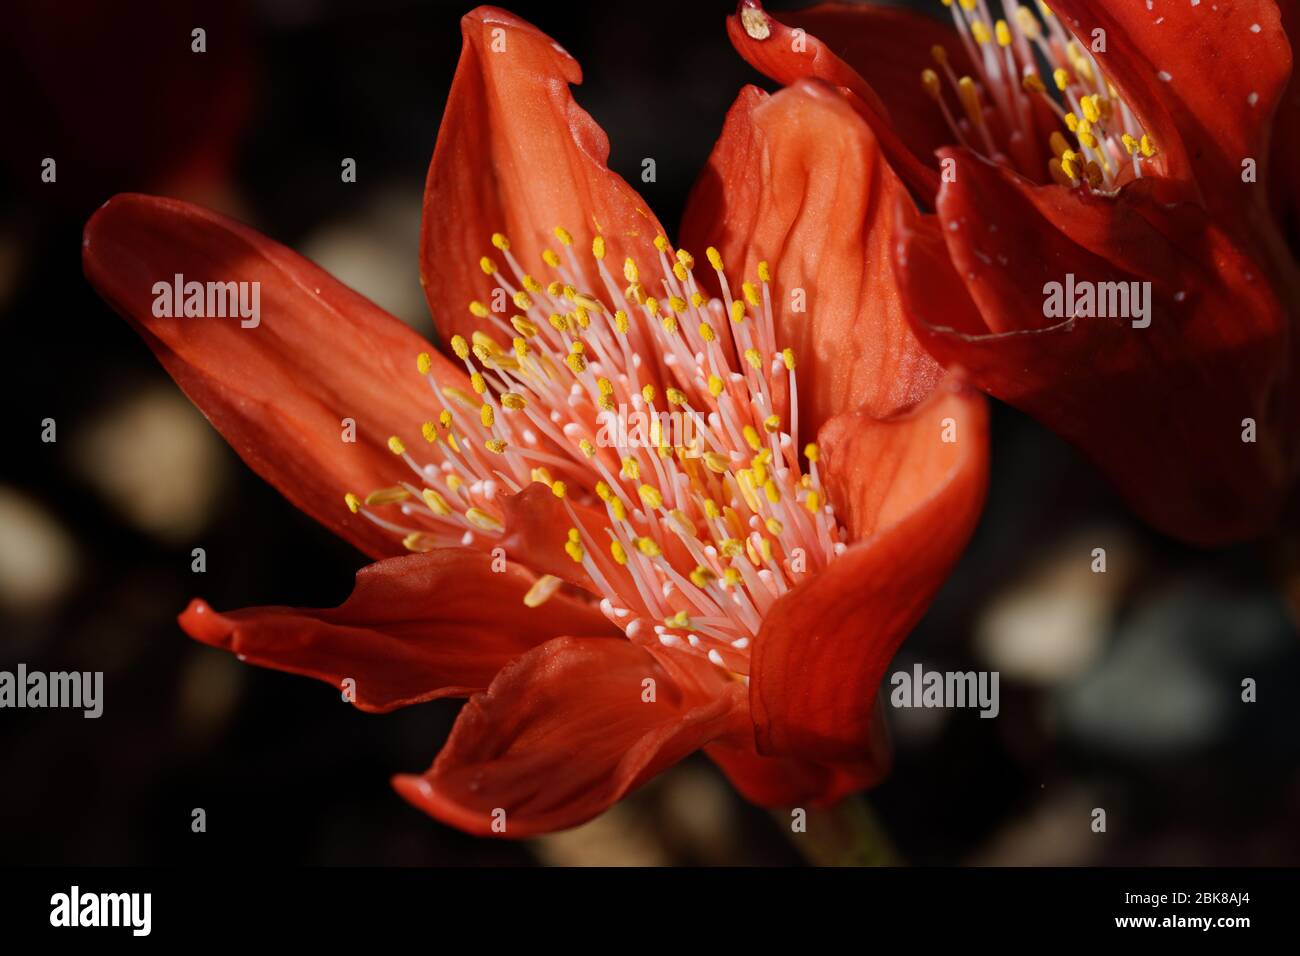 Haemanthus coccineus, the blood flower, blood lily or paintbrush lily, is a species of flowering plant in the amaryllis family Amaryllidaceae. Stock Photo